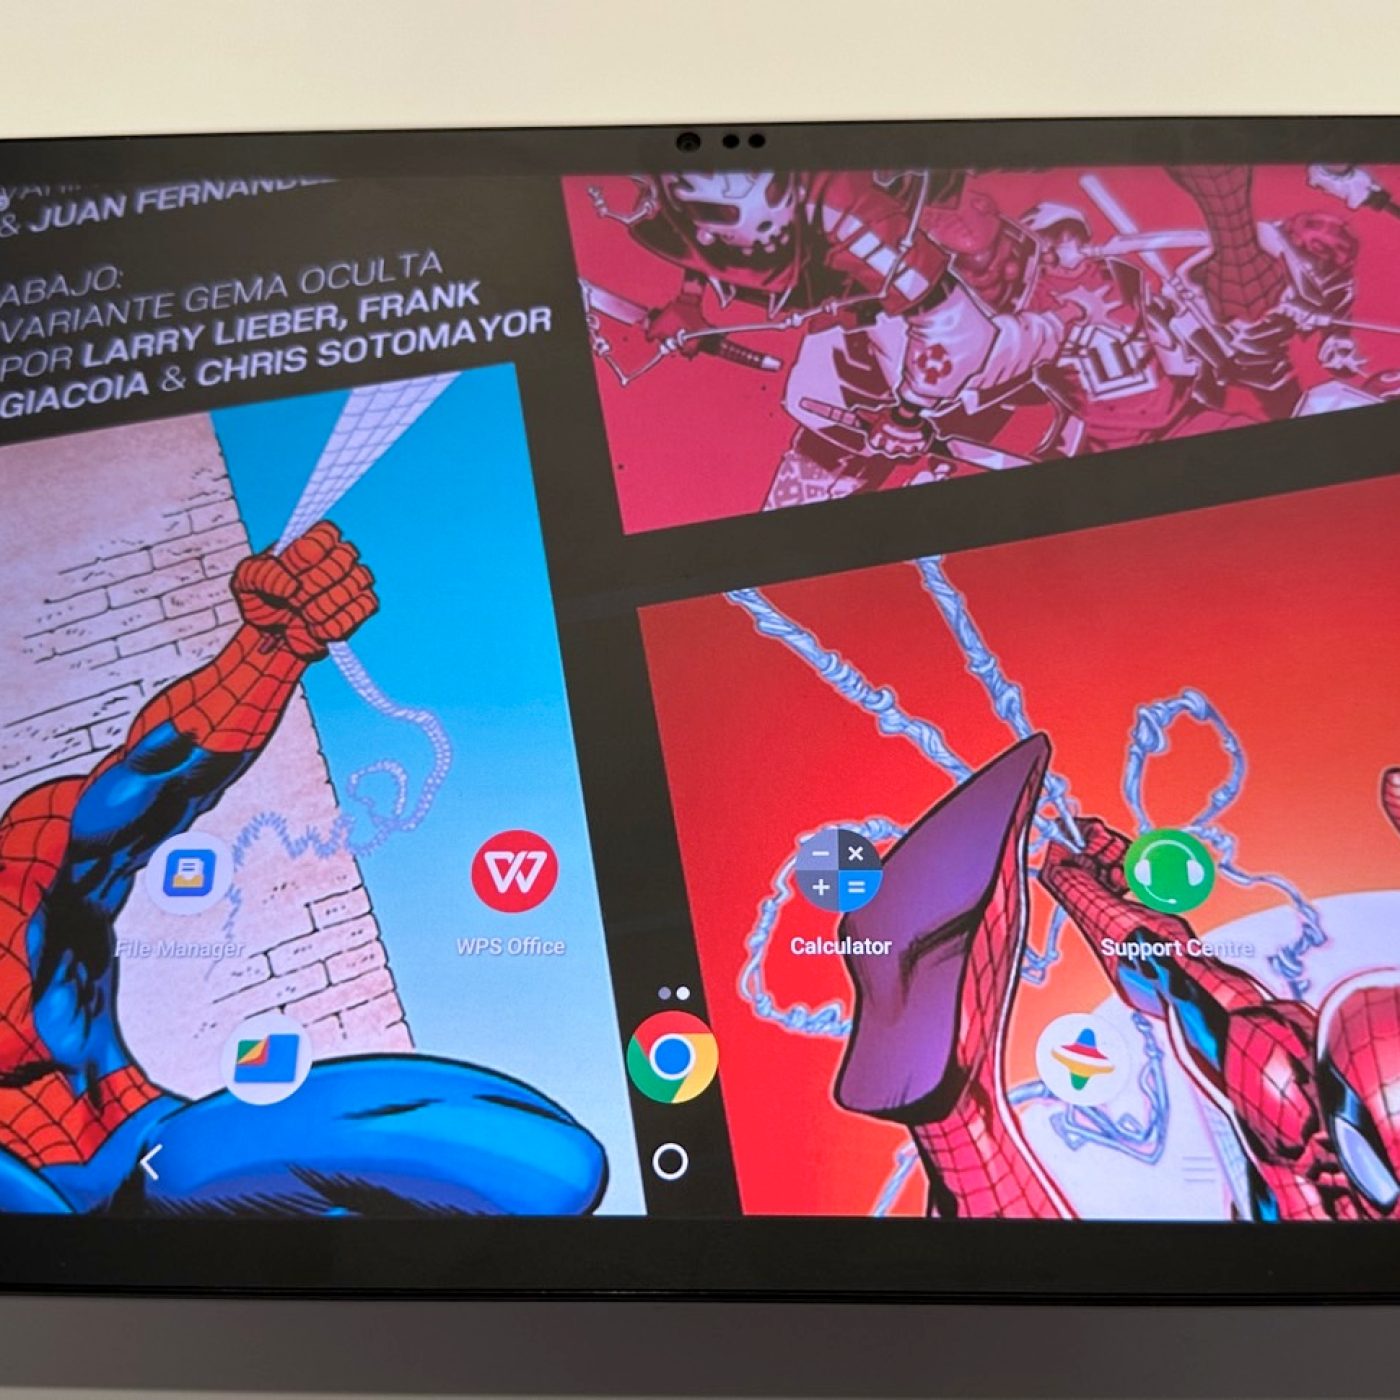 TCL NXTPAPER 11 Tablet: A Paper-Like Display for a More Comfortable Reading  Experience, by Tech Explorers